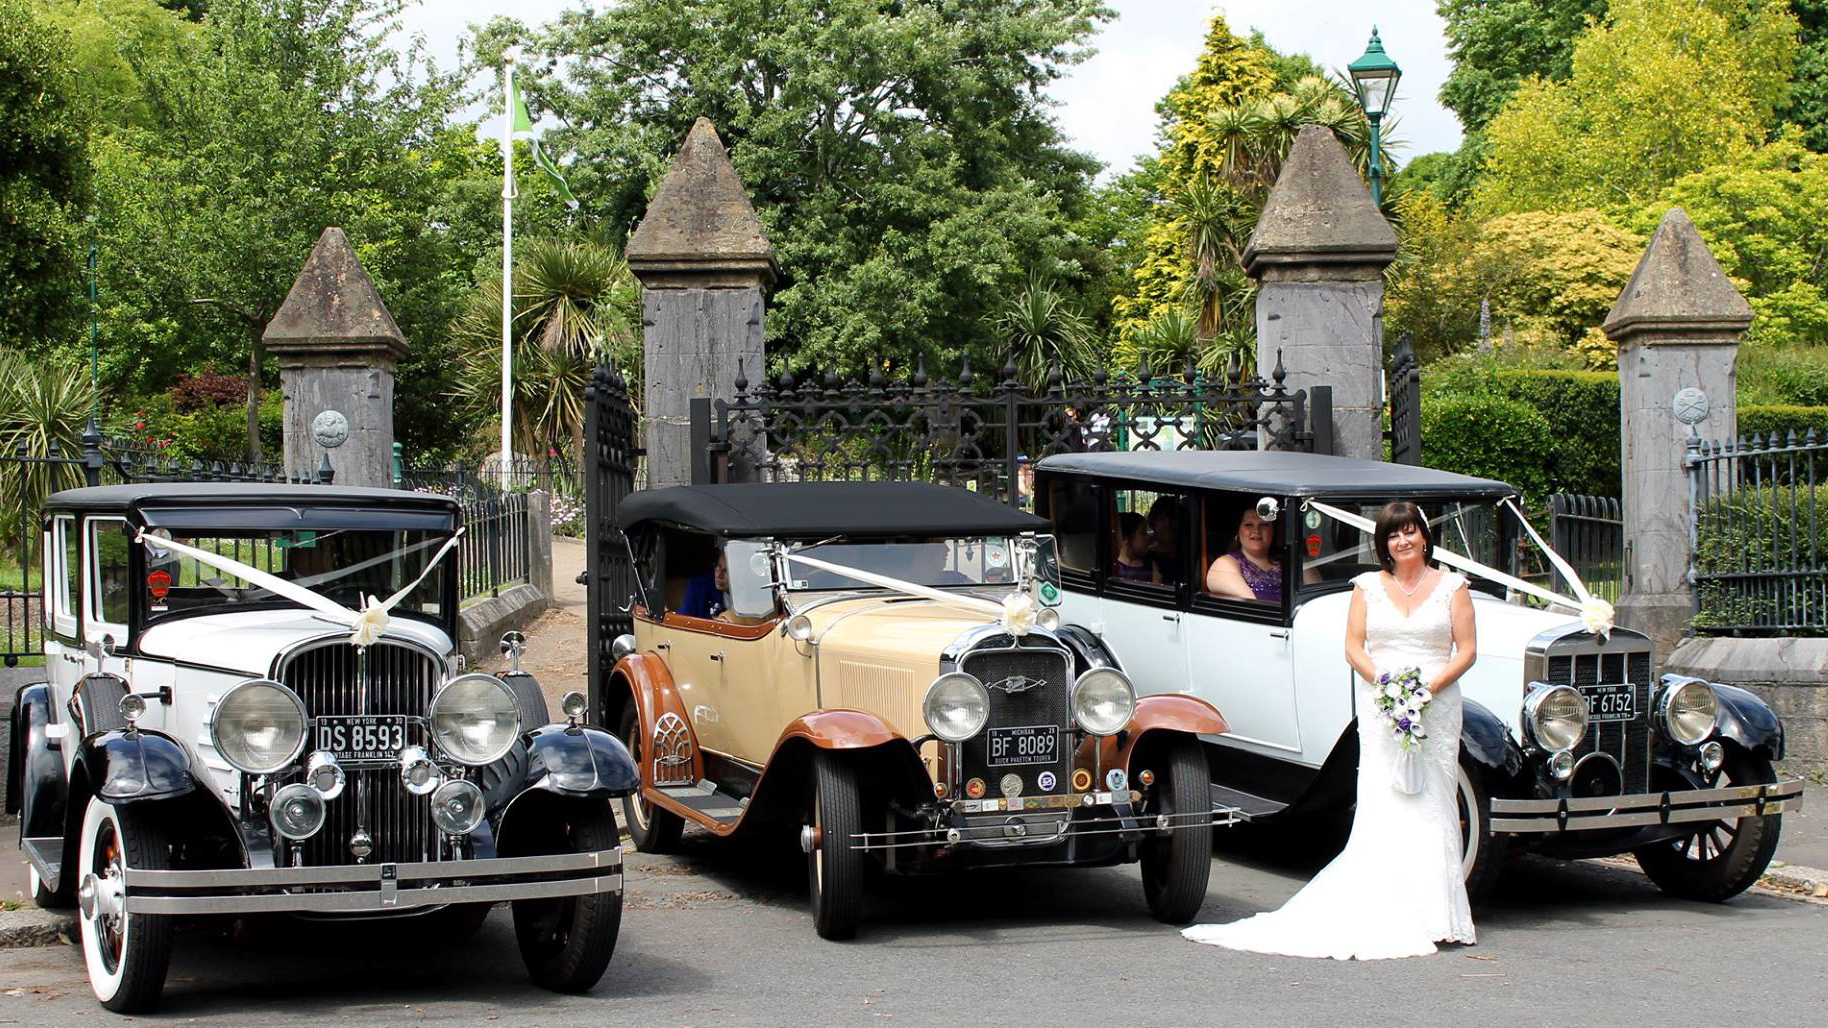 Three vintage wedding cars decorated with white ribbons at a local Torquay wedding. All three vehicles are parked side-by-side with bride wearing a white dress holding a bridal bou